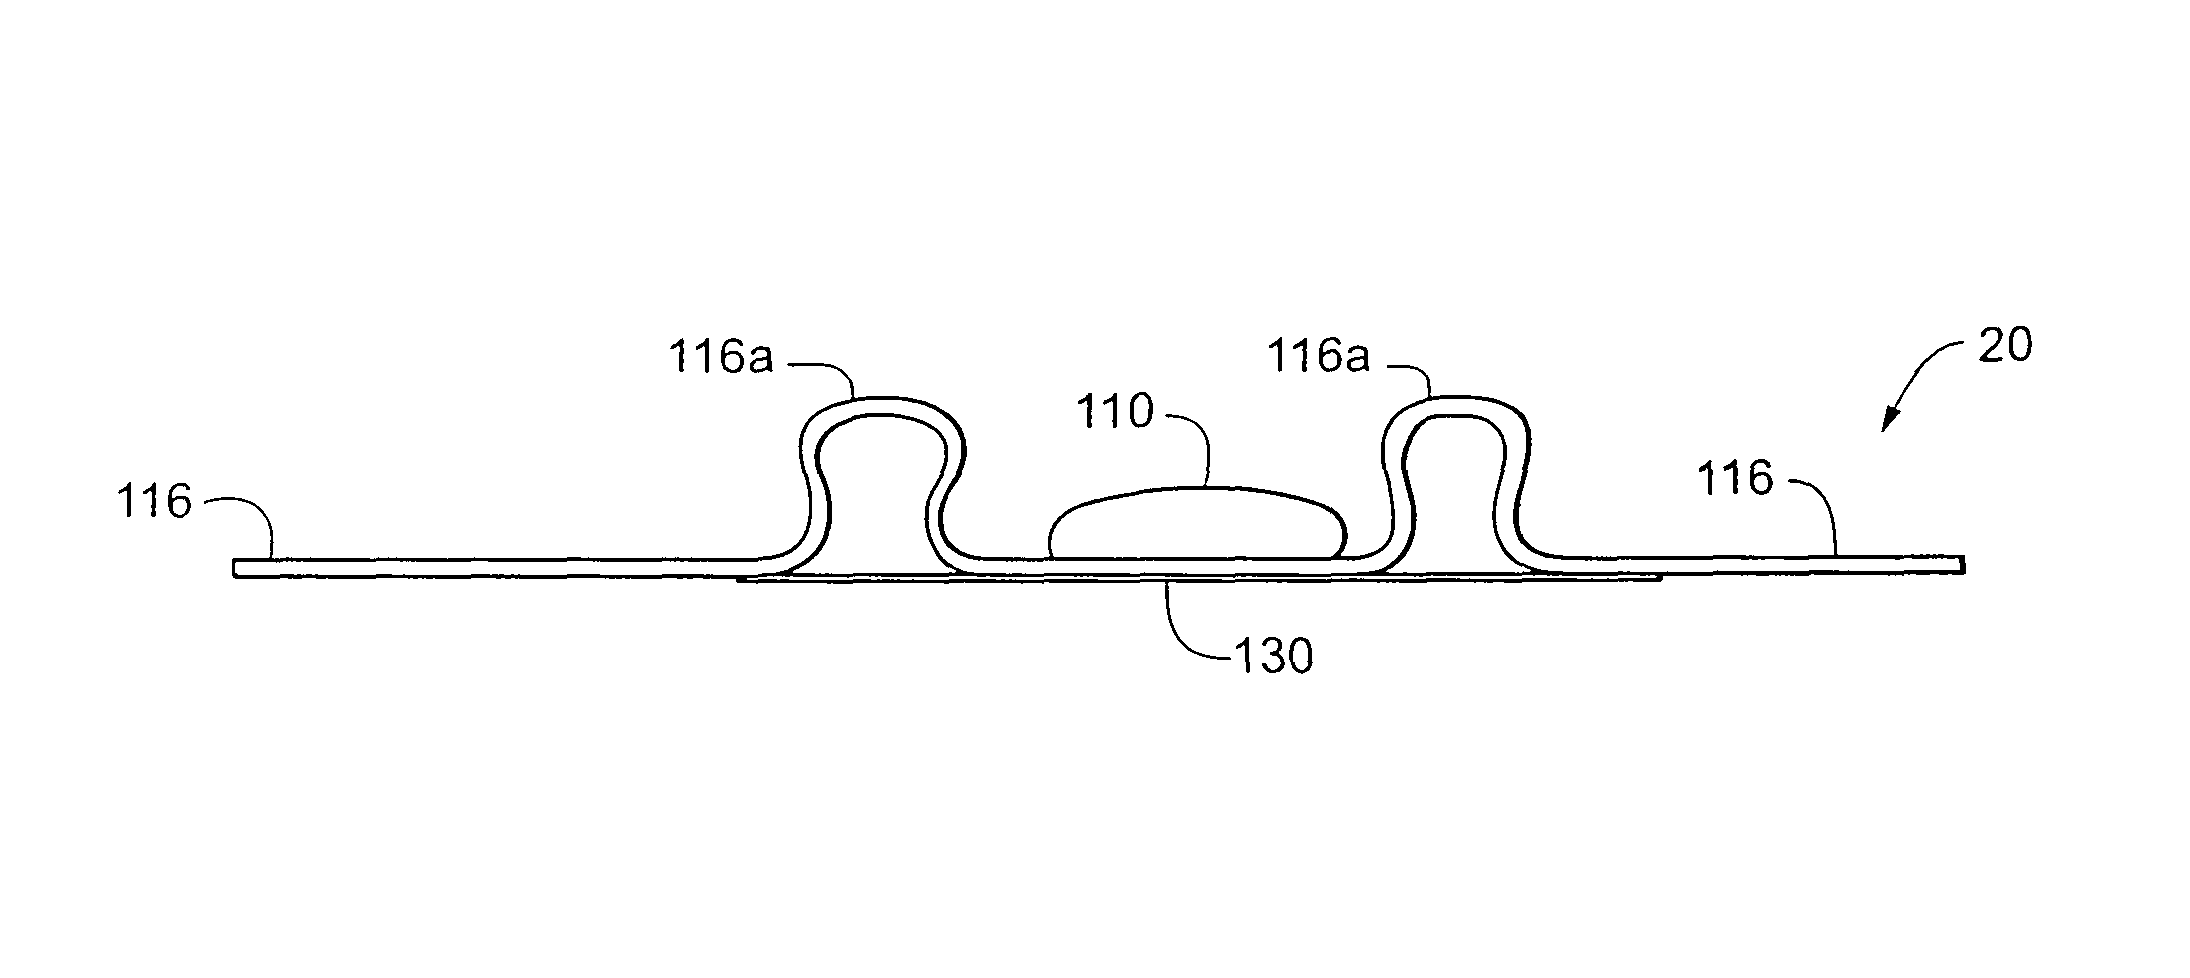 Electrical stimulation device and method for therapeutic treatment and pain management